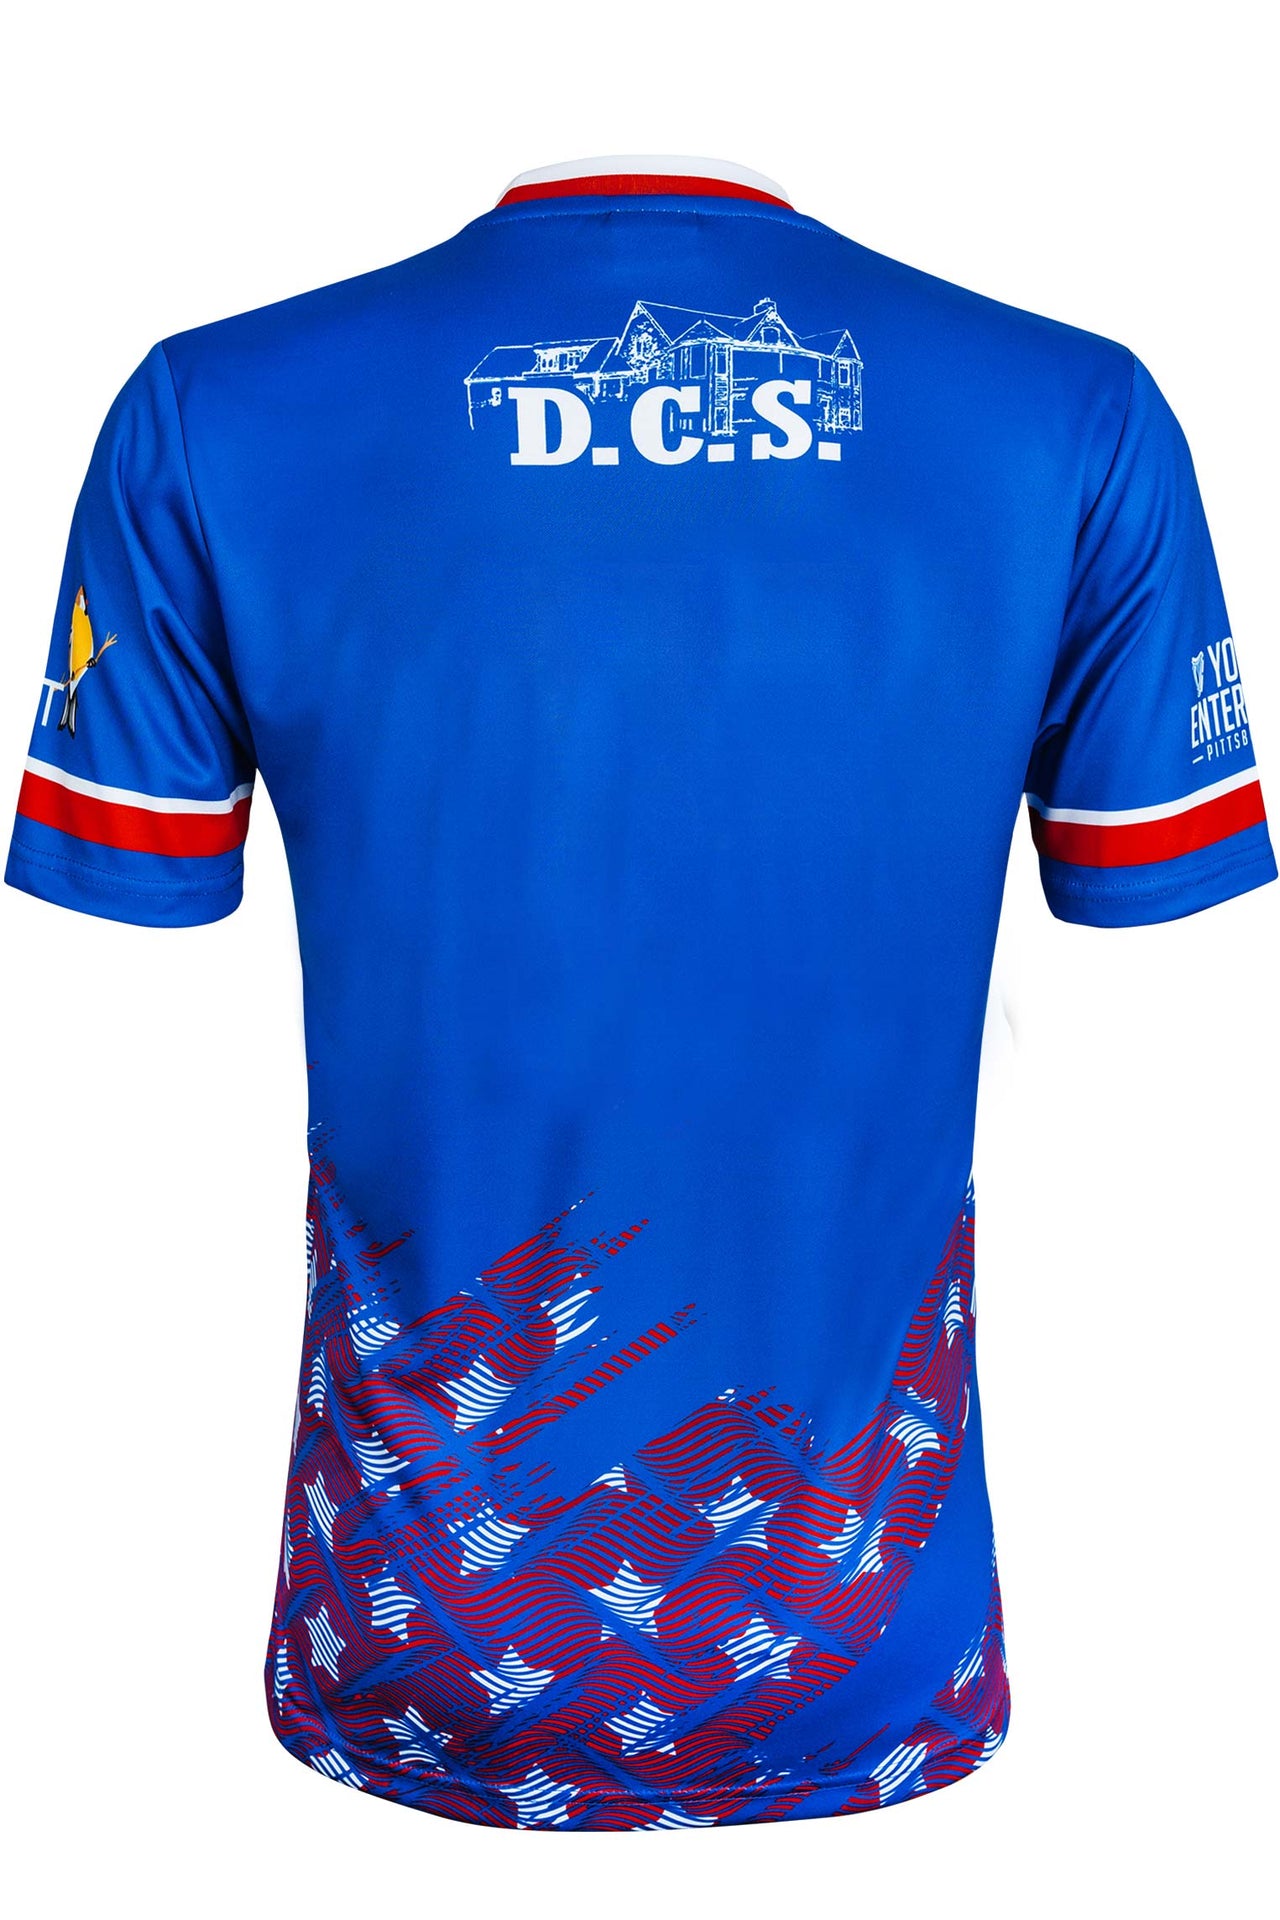 USGAA County Home Jersey Player Fit Adult